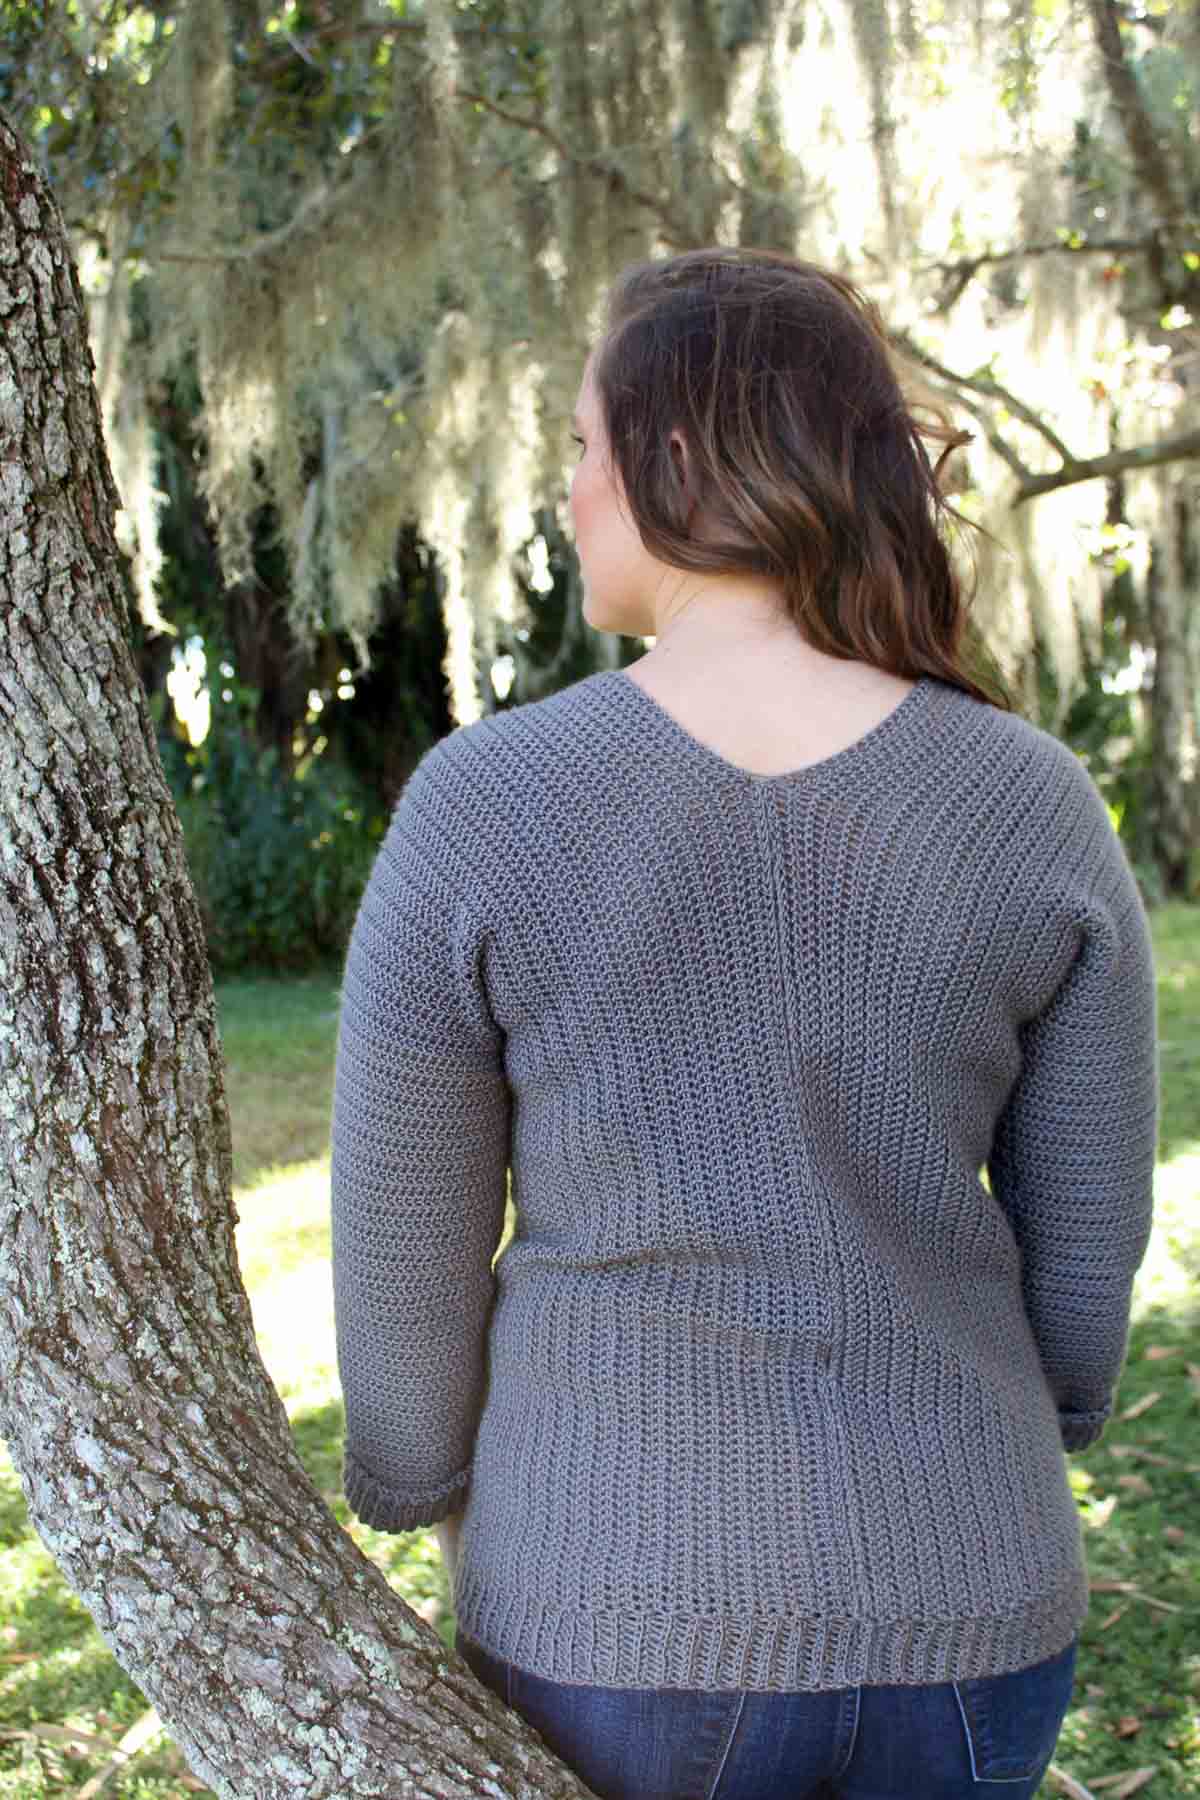 Woman standing outside next to tree. She is wearing a gray v-neck crochet pullover sweater. Free pattern for the sweater.